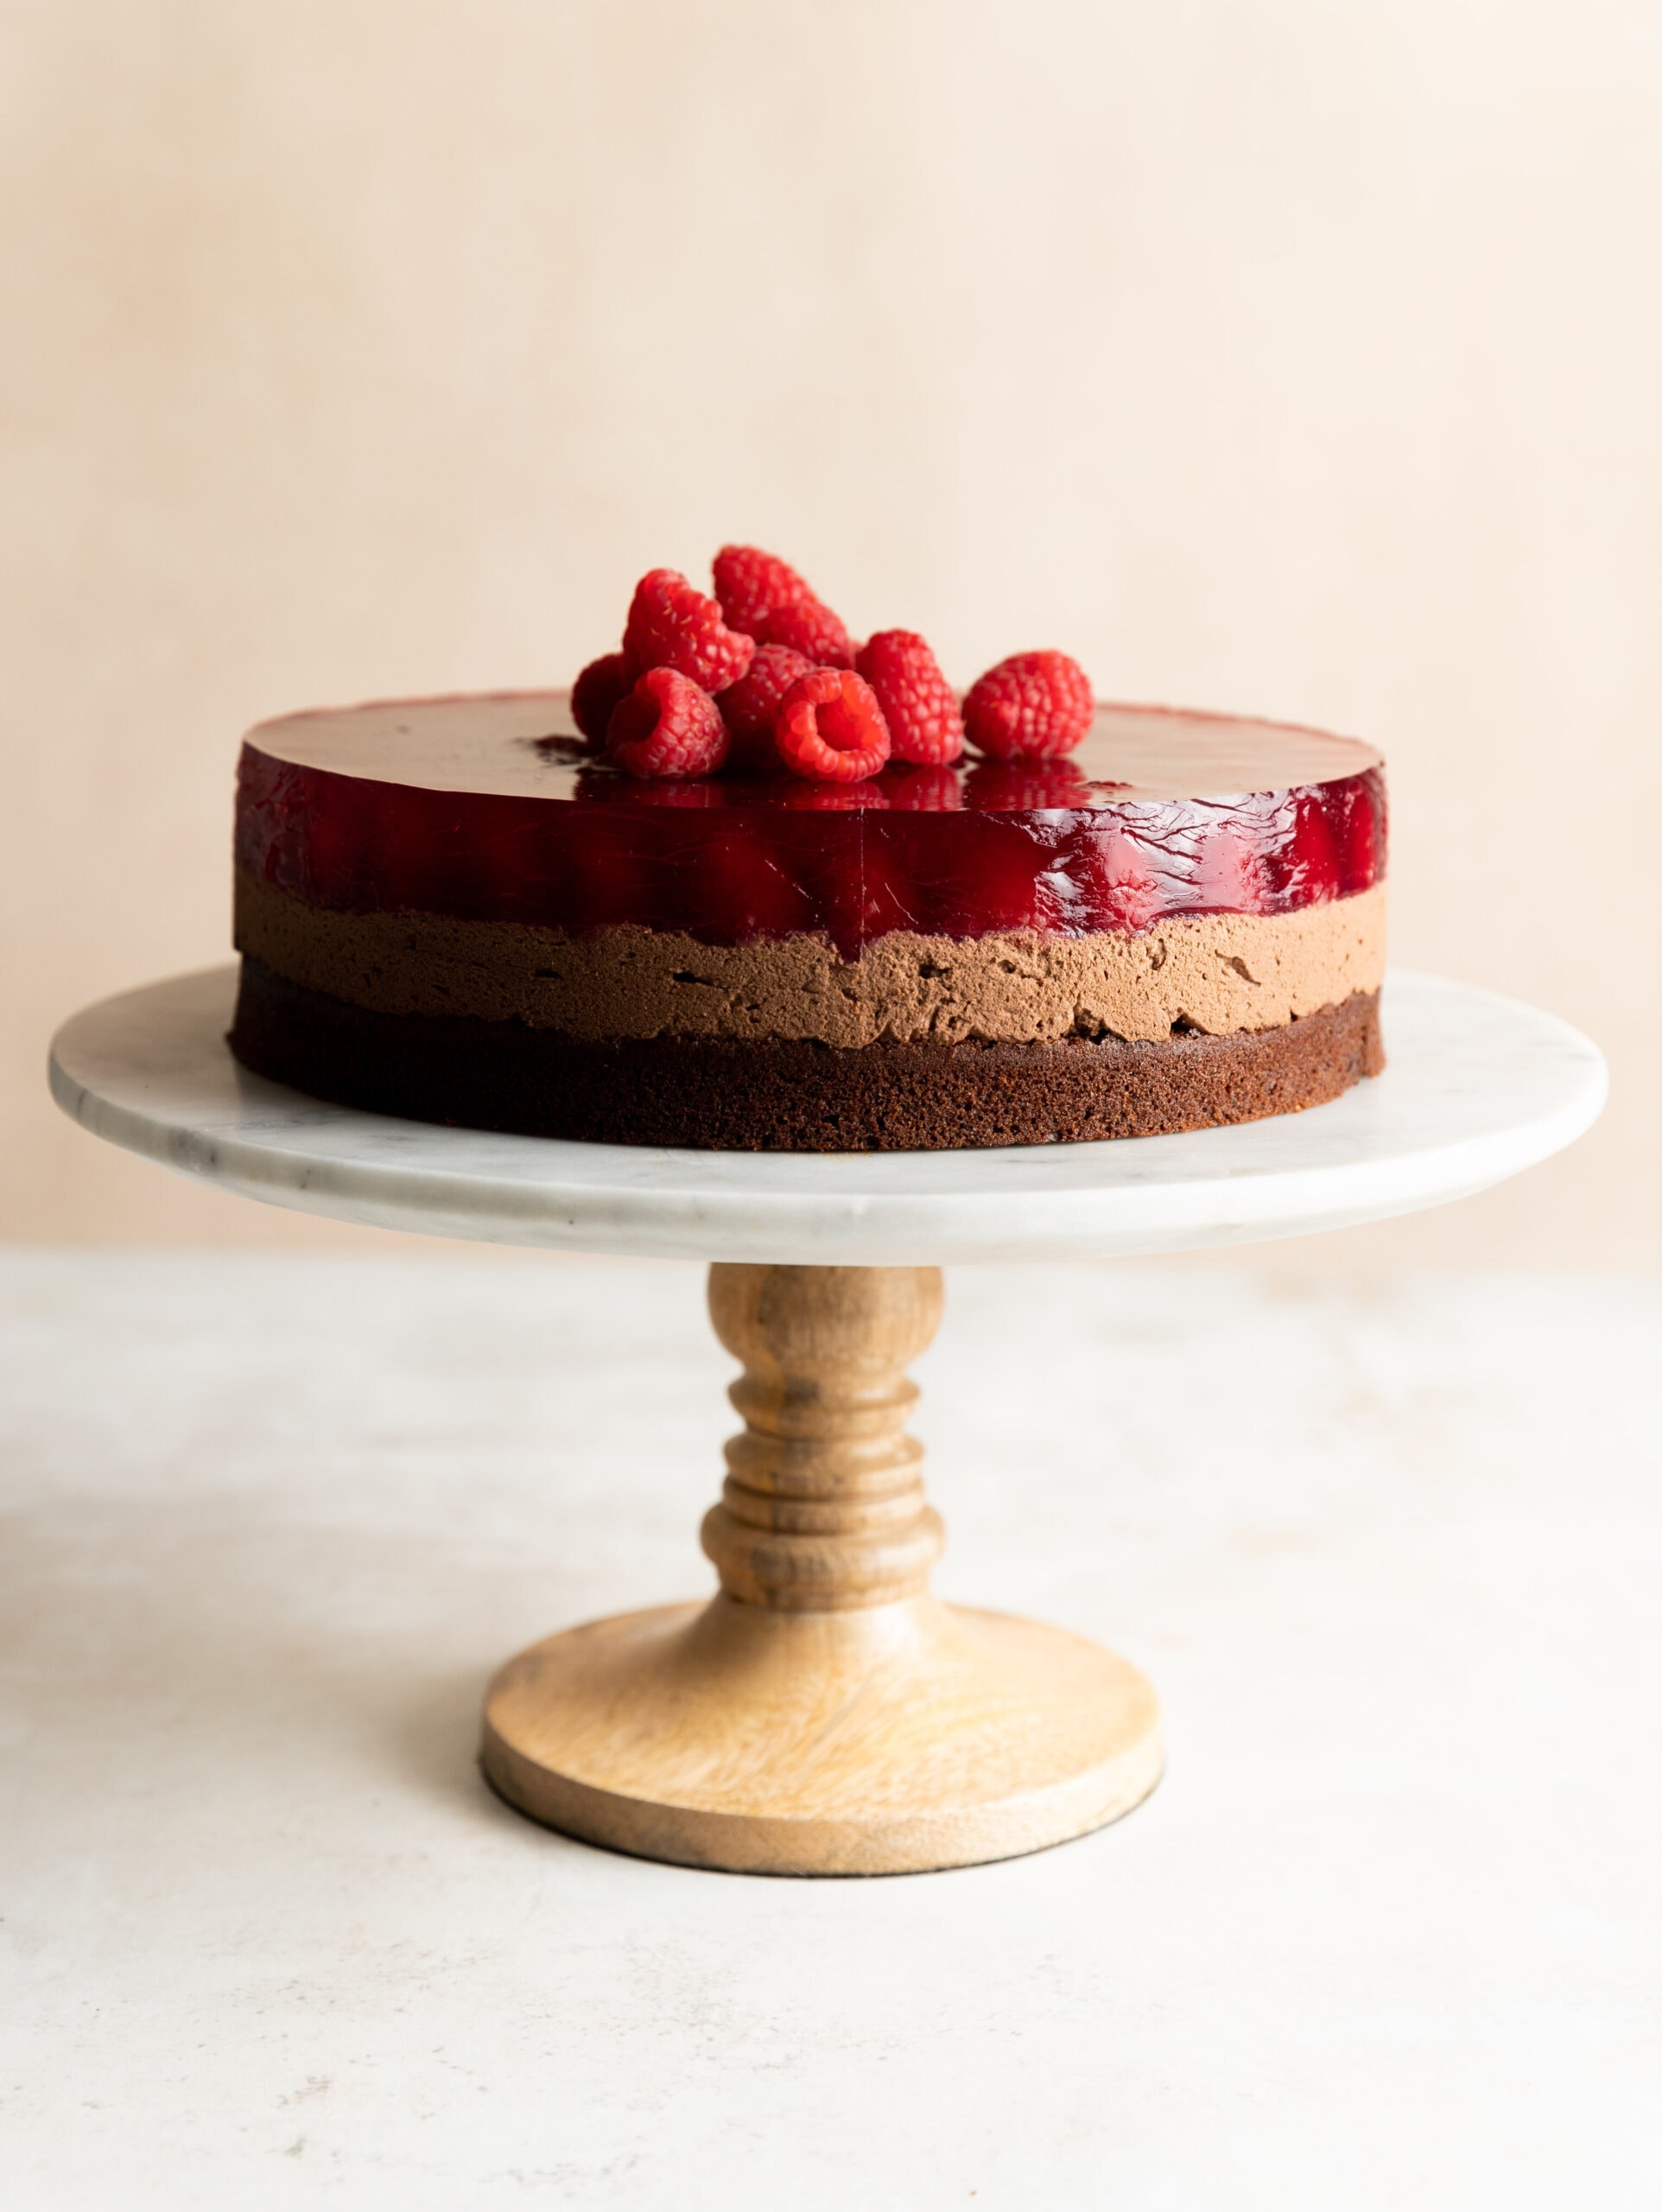 Side view of Schoko Himbeerkuchen topped with fresh raspberries on a marble and wood cake stand.